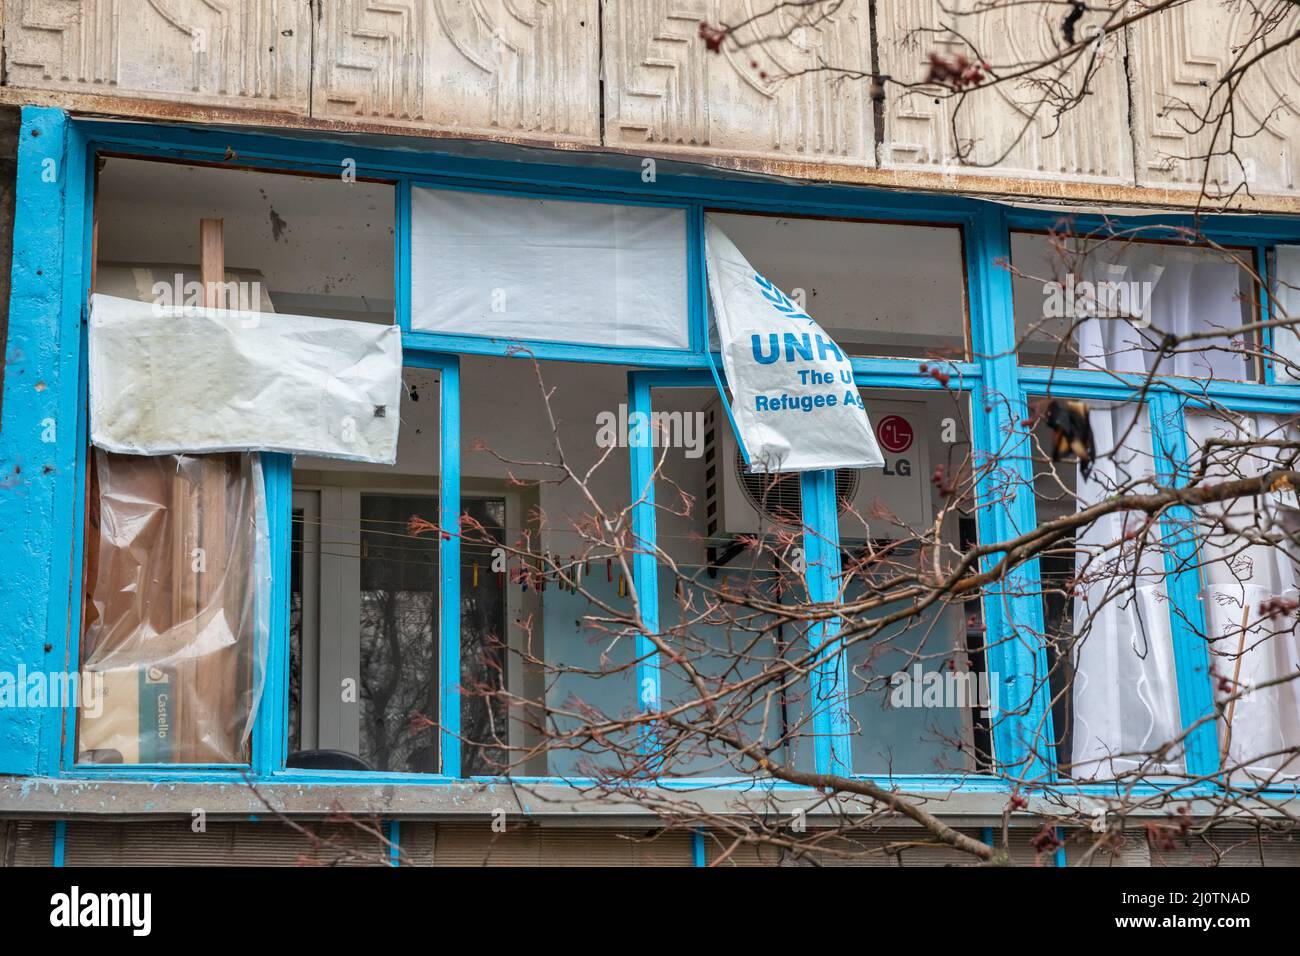 THE UNHCR flag in one window after the explosion of the Grad rocket. Stock Photo